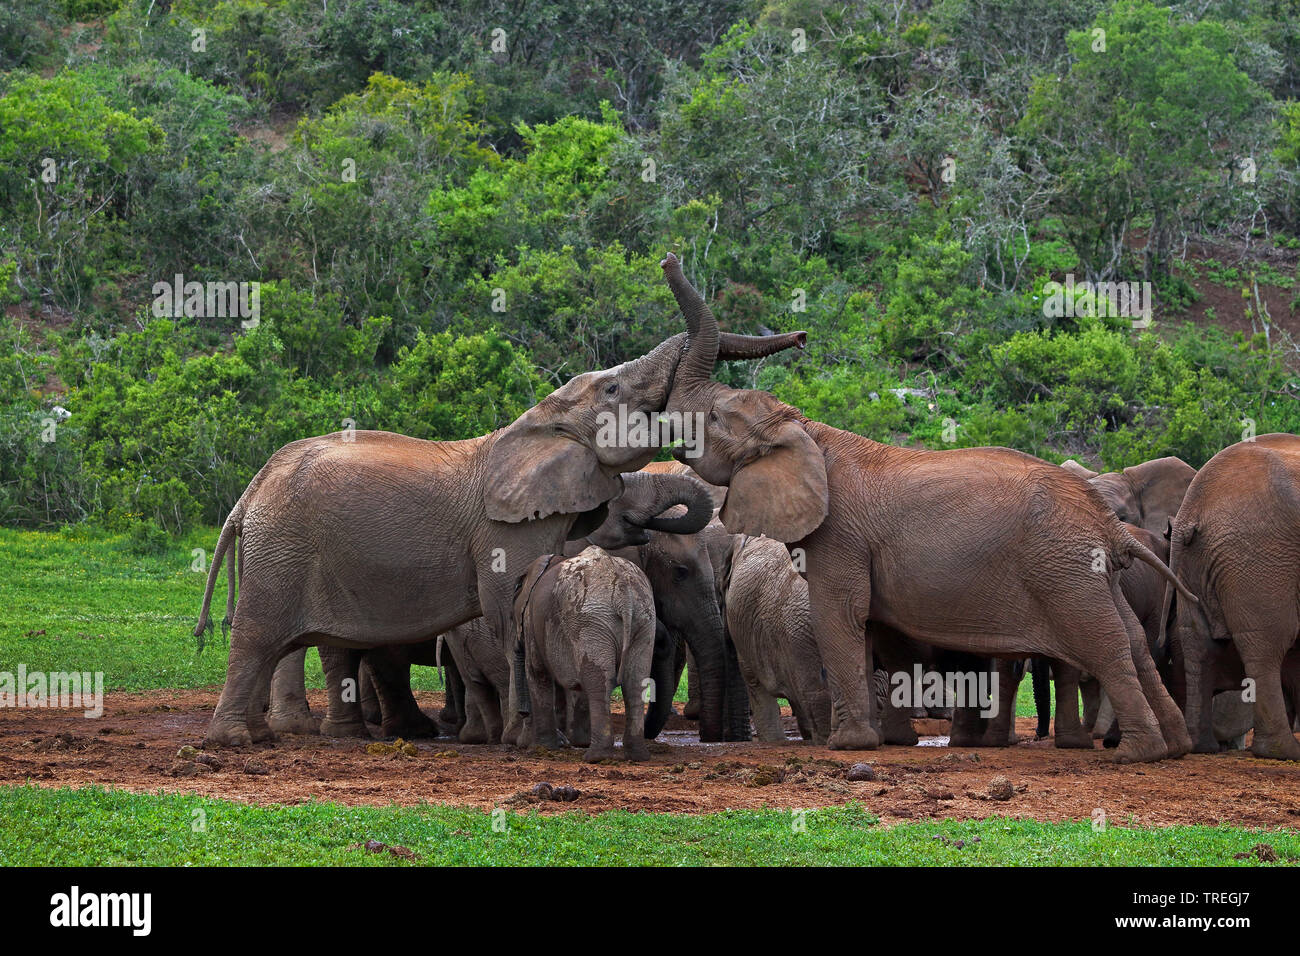 African elephant (Loxodonta africana), young bulls fight at waterhole, South Africa, Eastern Cape, Addo Elephant National Park Stock Photo